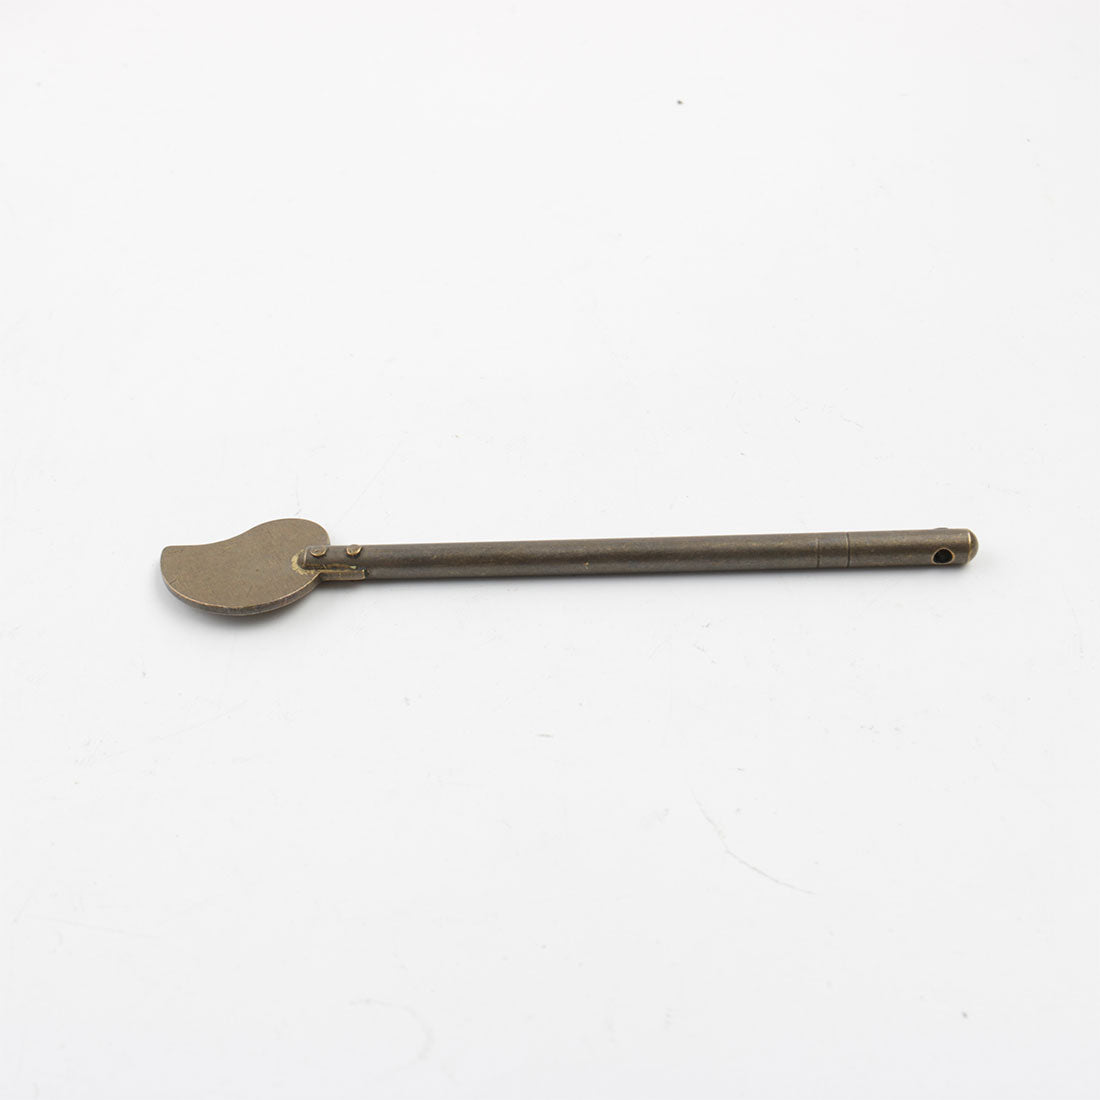 uxcell Uxcell Household Metal Chinese Leaf Style Cabinet Key Latch Door Bolt Locking Pin Bronze Tone